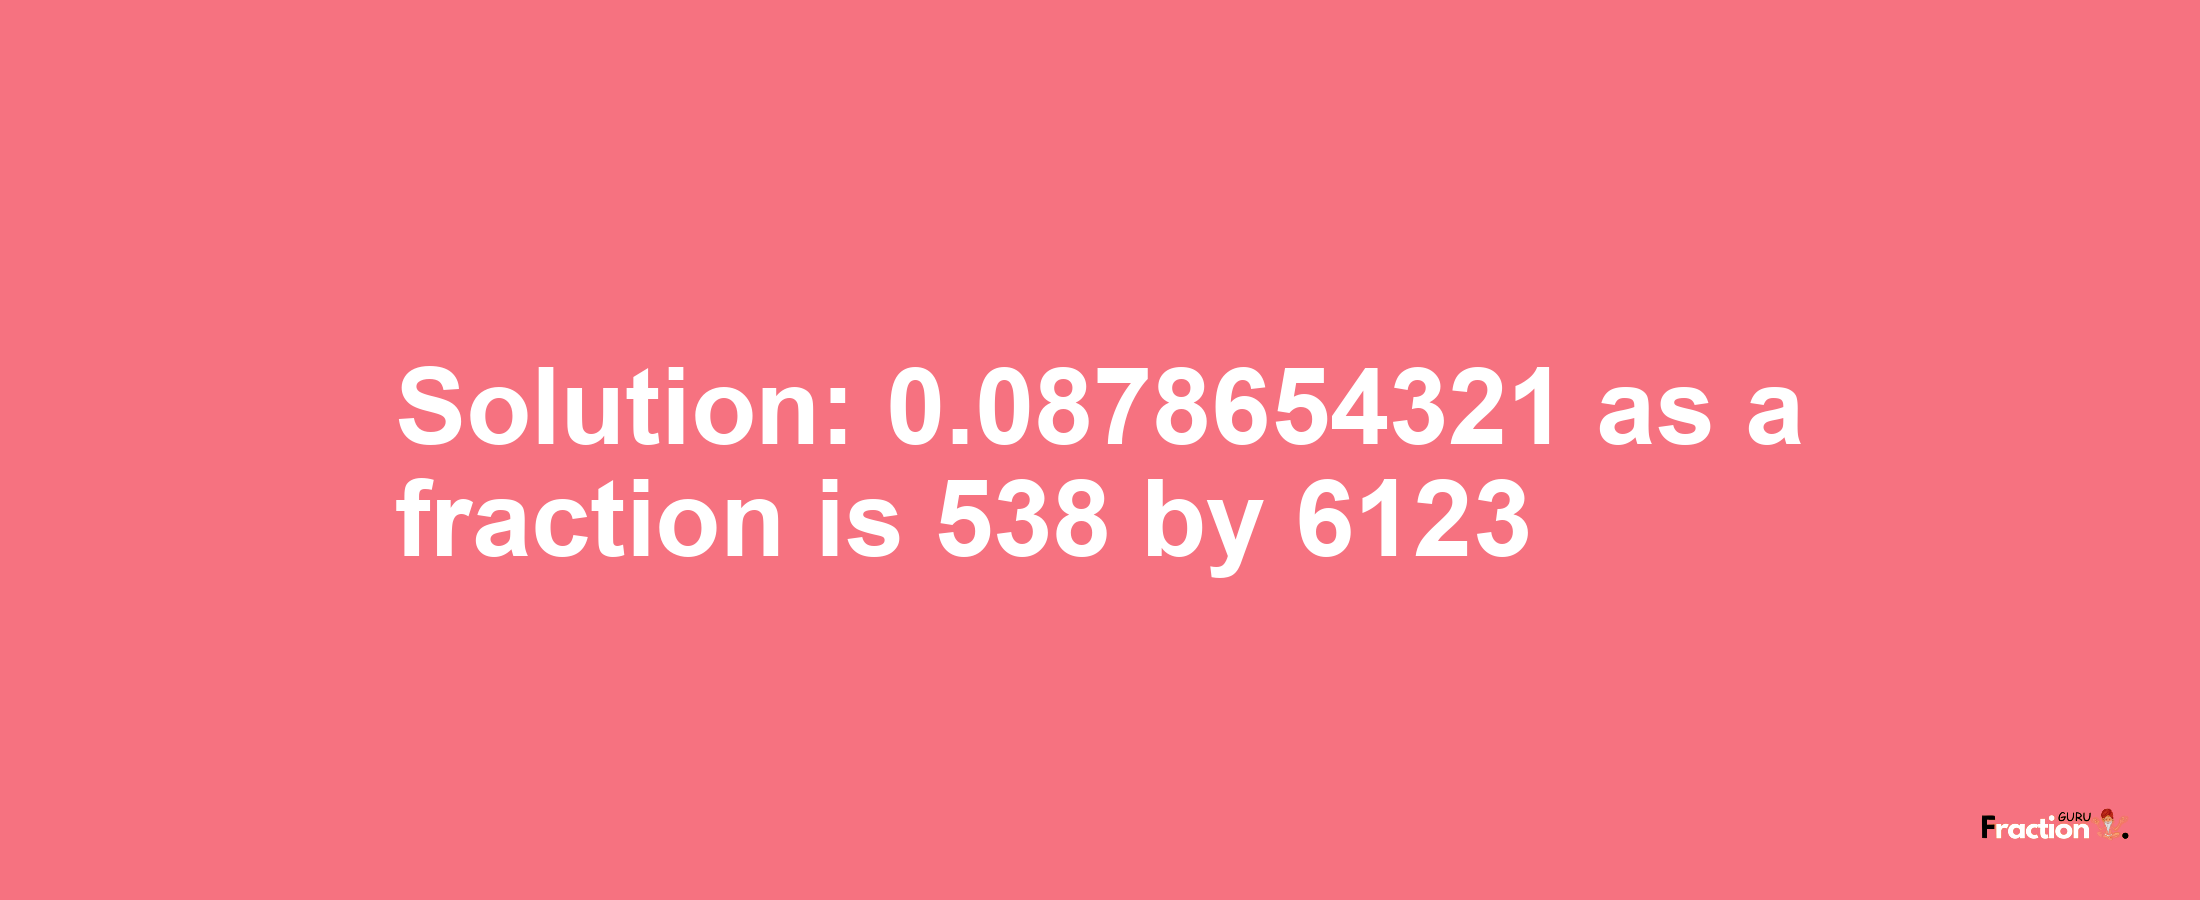 Solution:0.0878654321 as a fraction is 538/6123